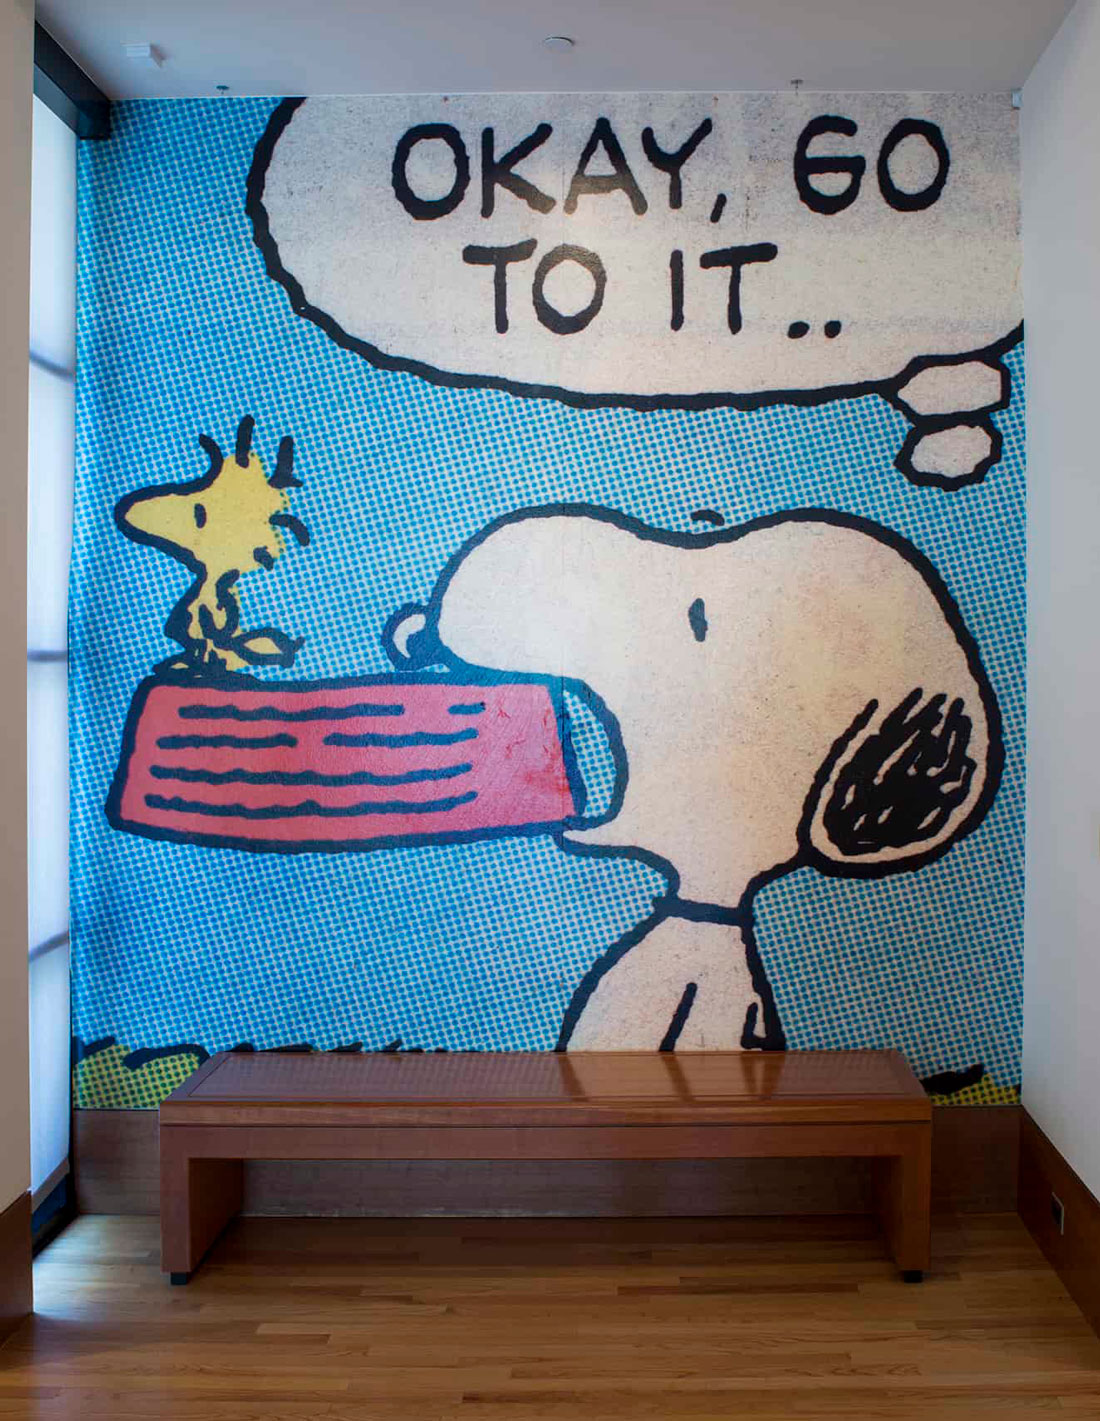 A frame from a Peanuts cartoon covering a wall. 